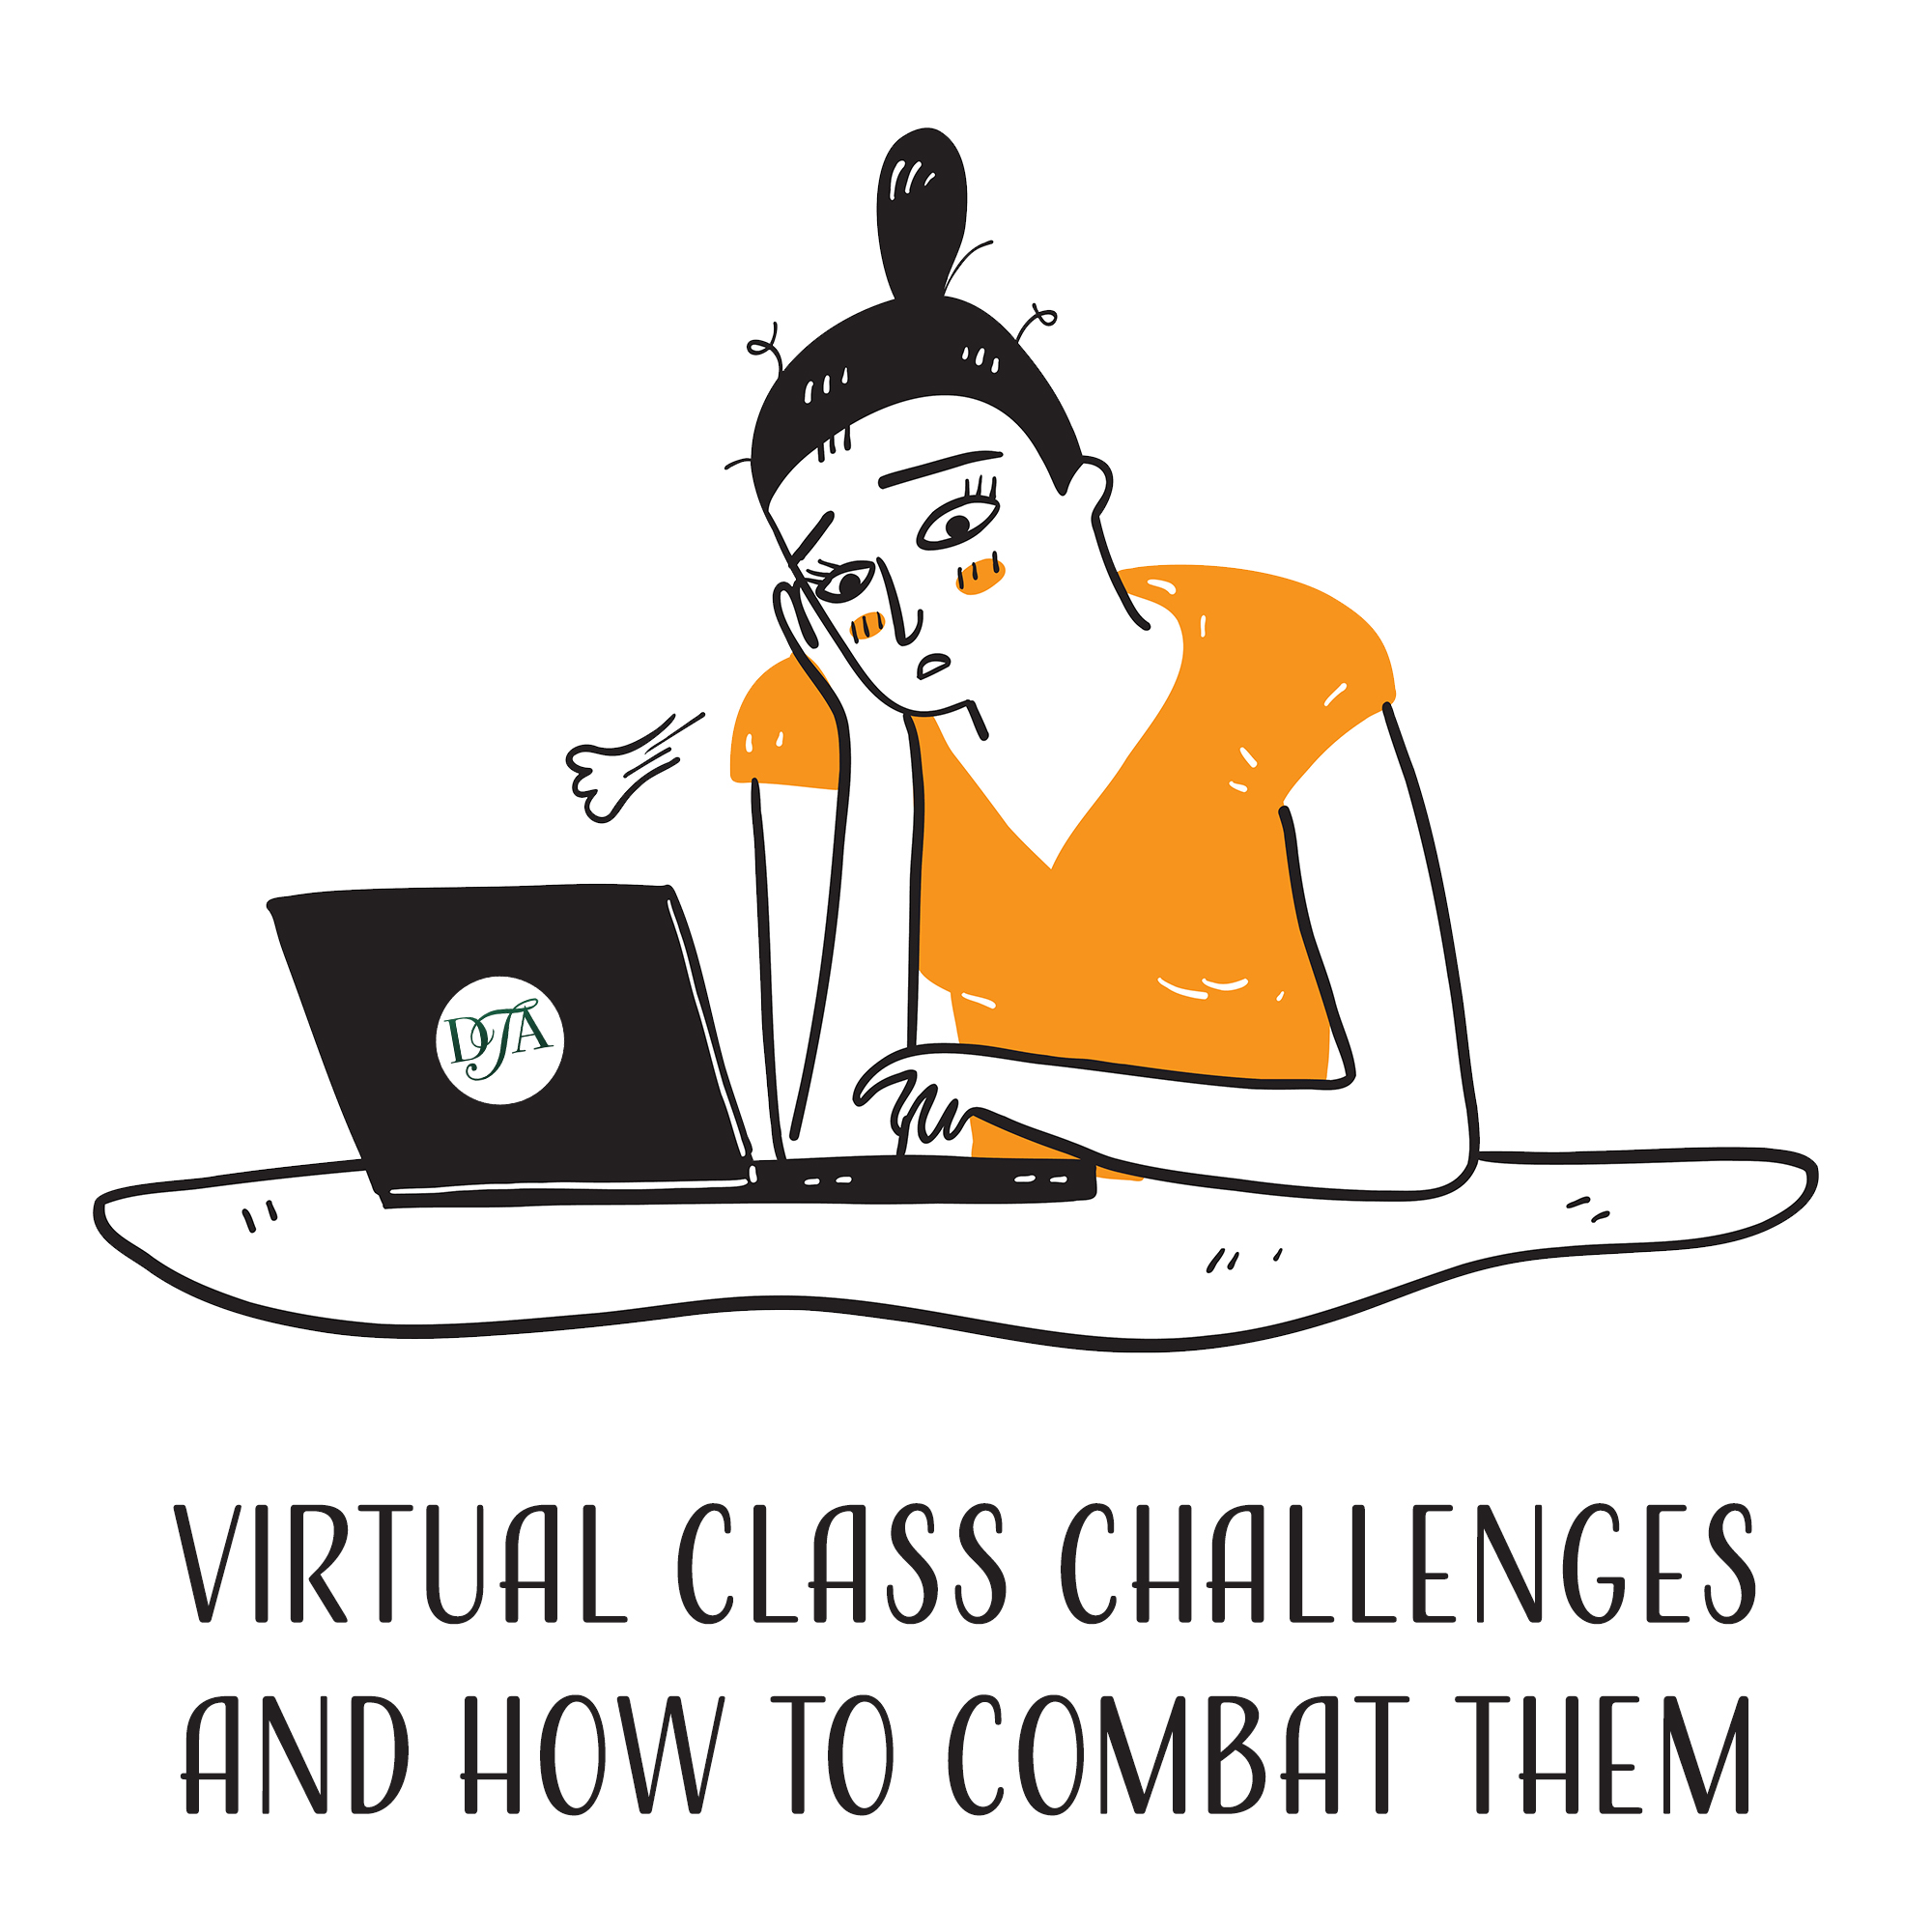 Virtual class challenges and how to combat them